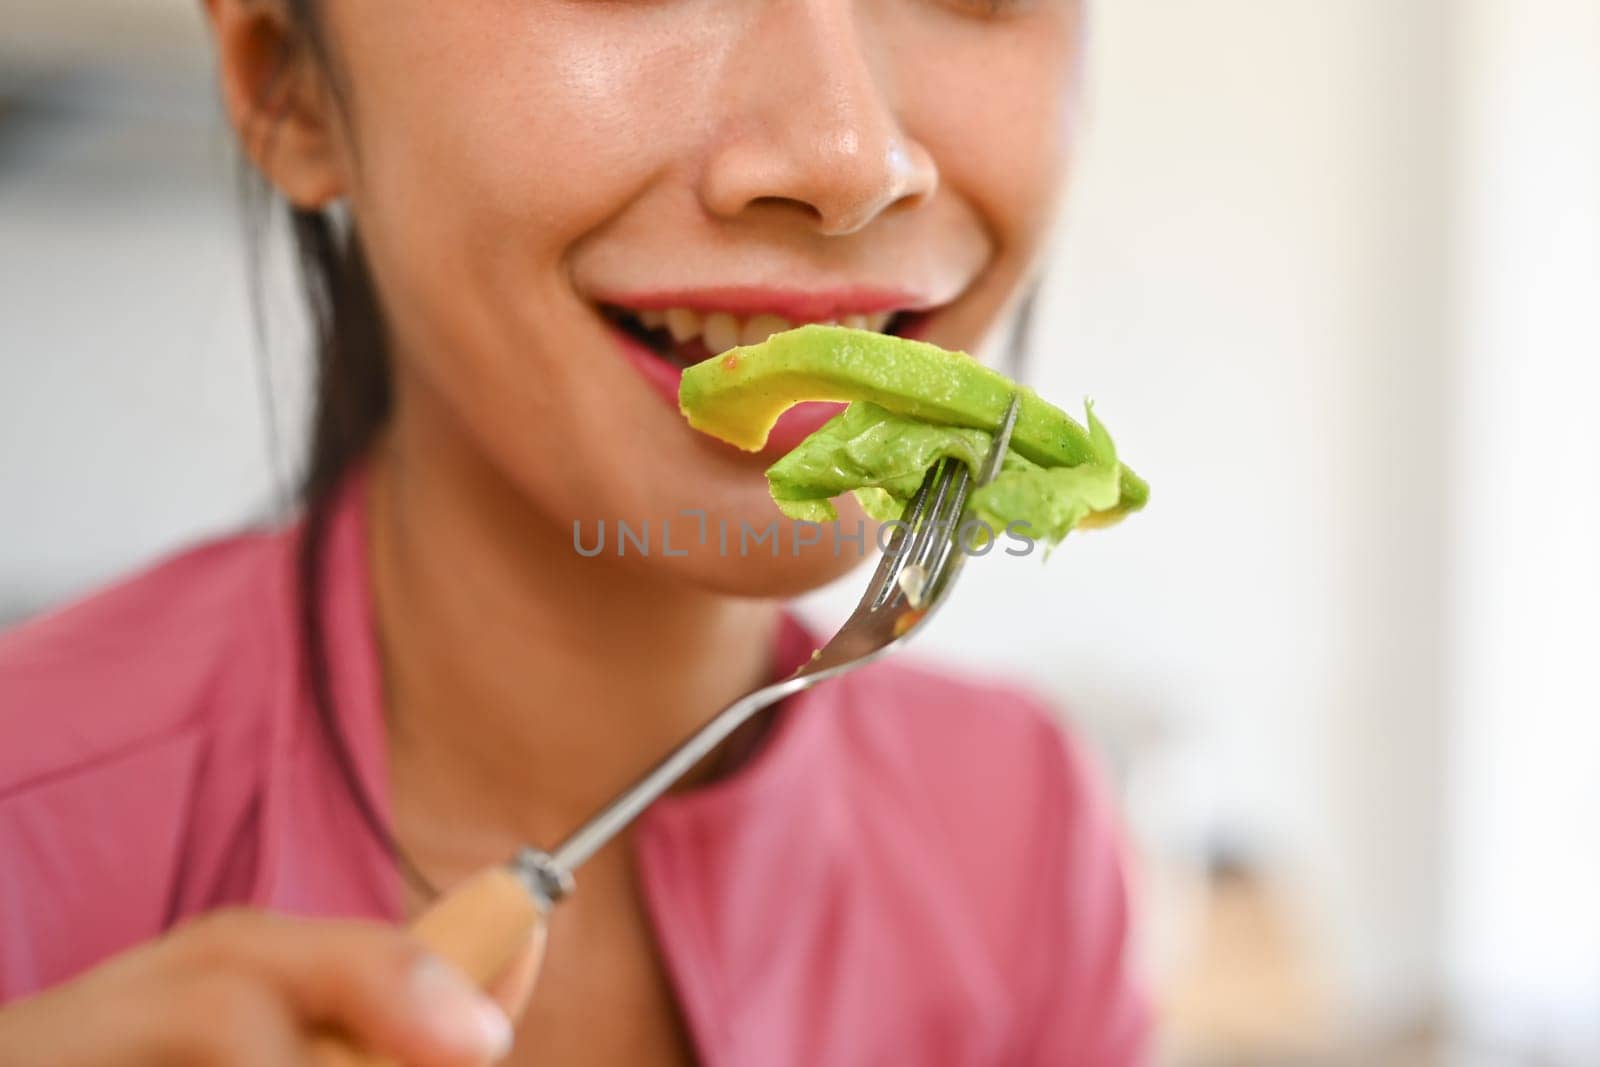 Young woman eating vegetable salad. Healthy eating, dieting snd wellbeing concept.